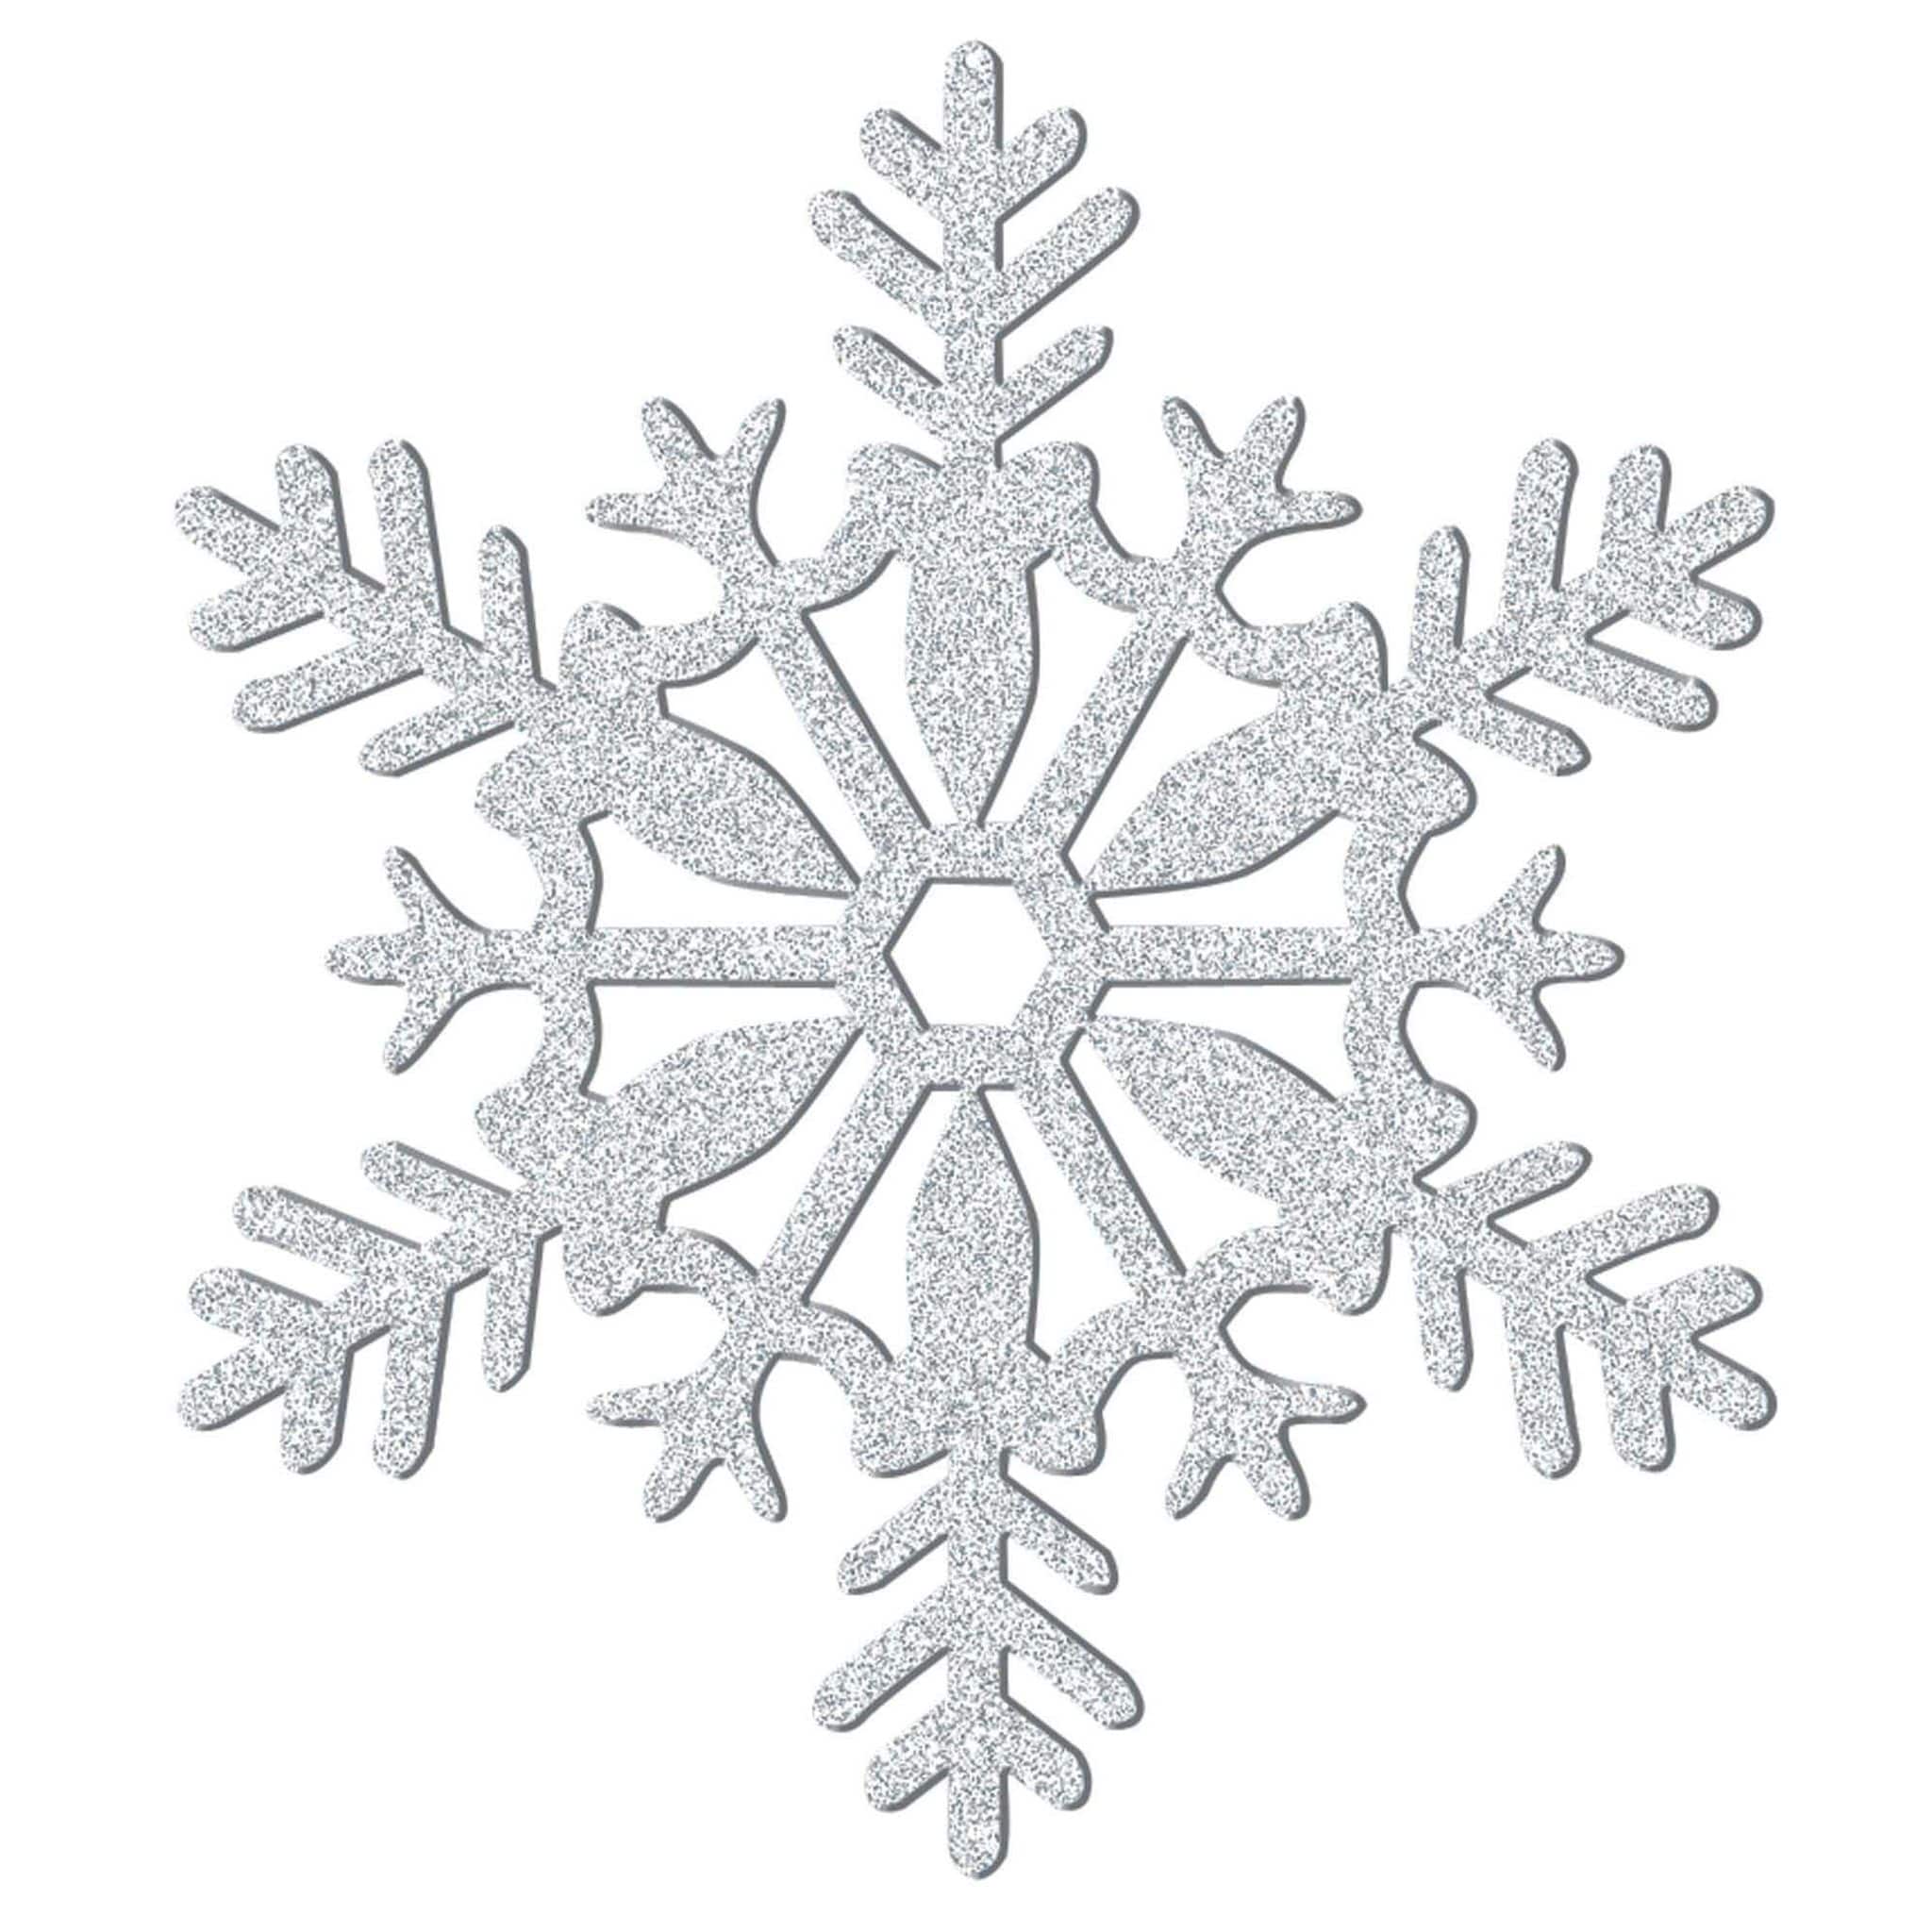 Silver snowflake from christmas decoration Vector Image